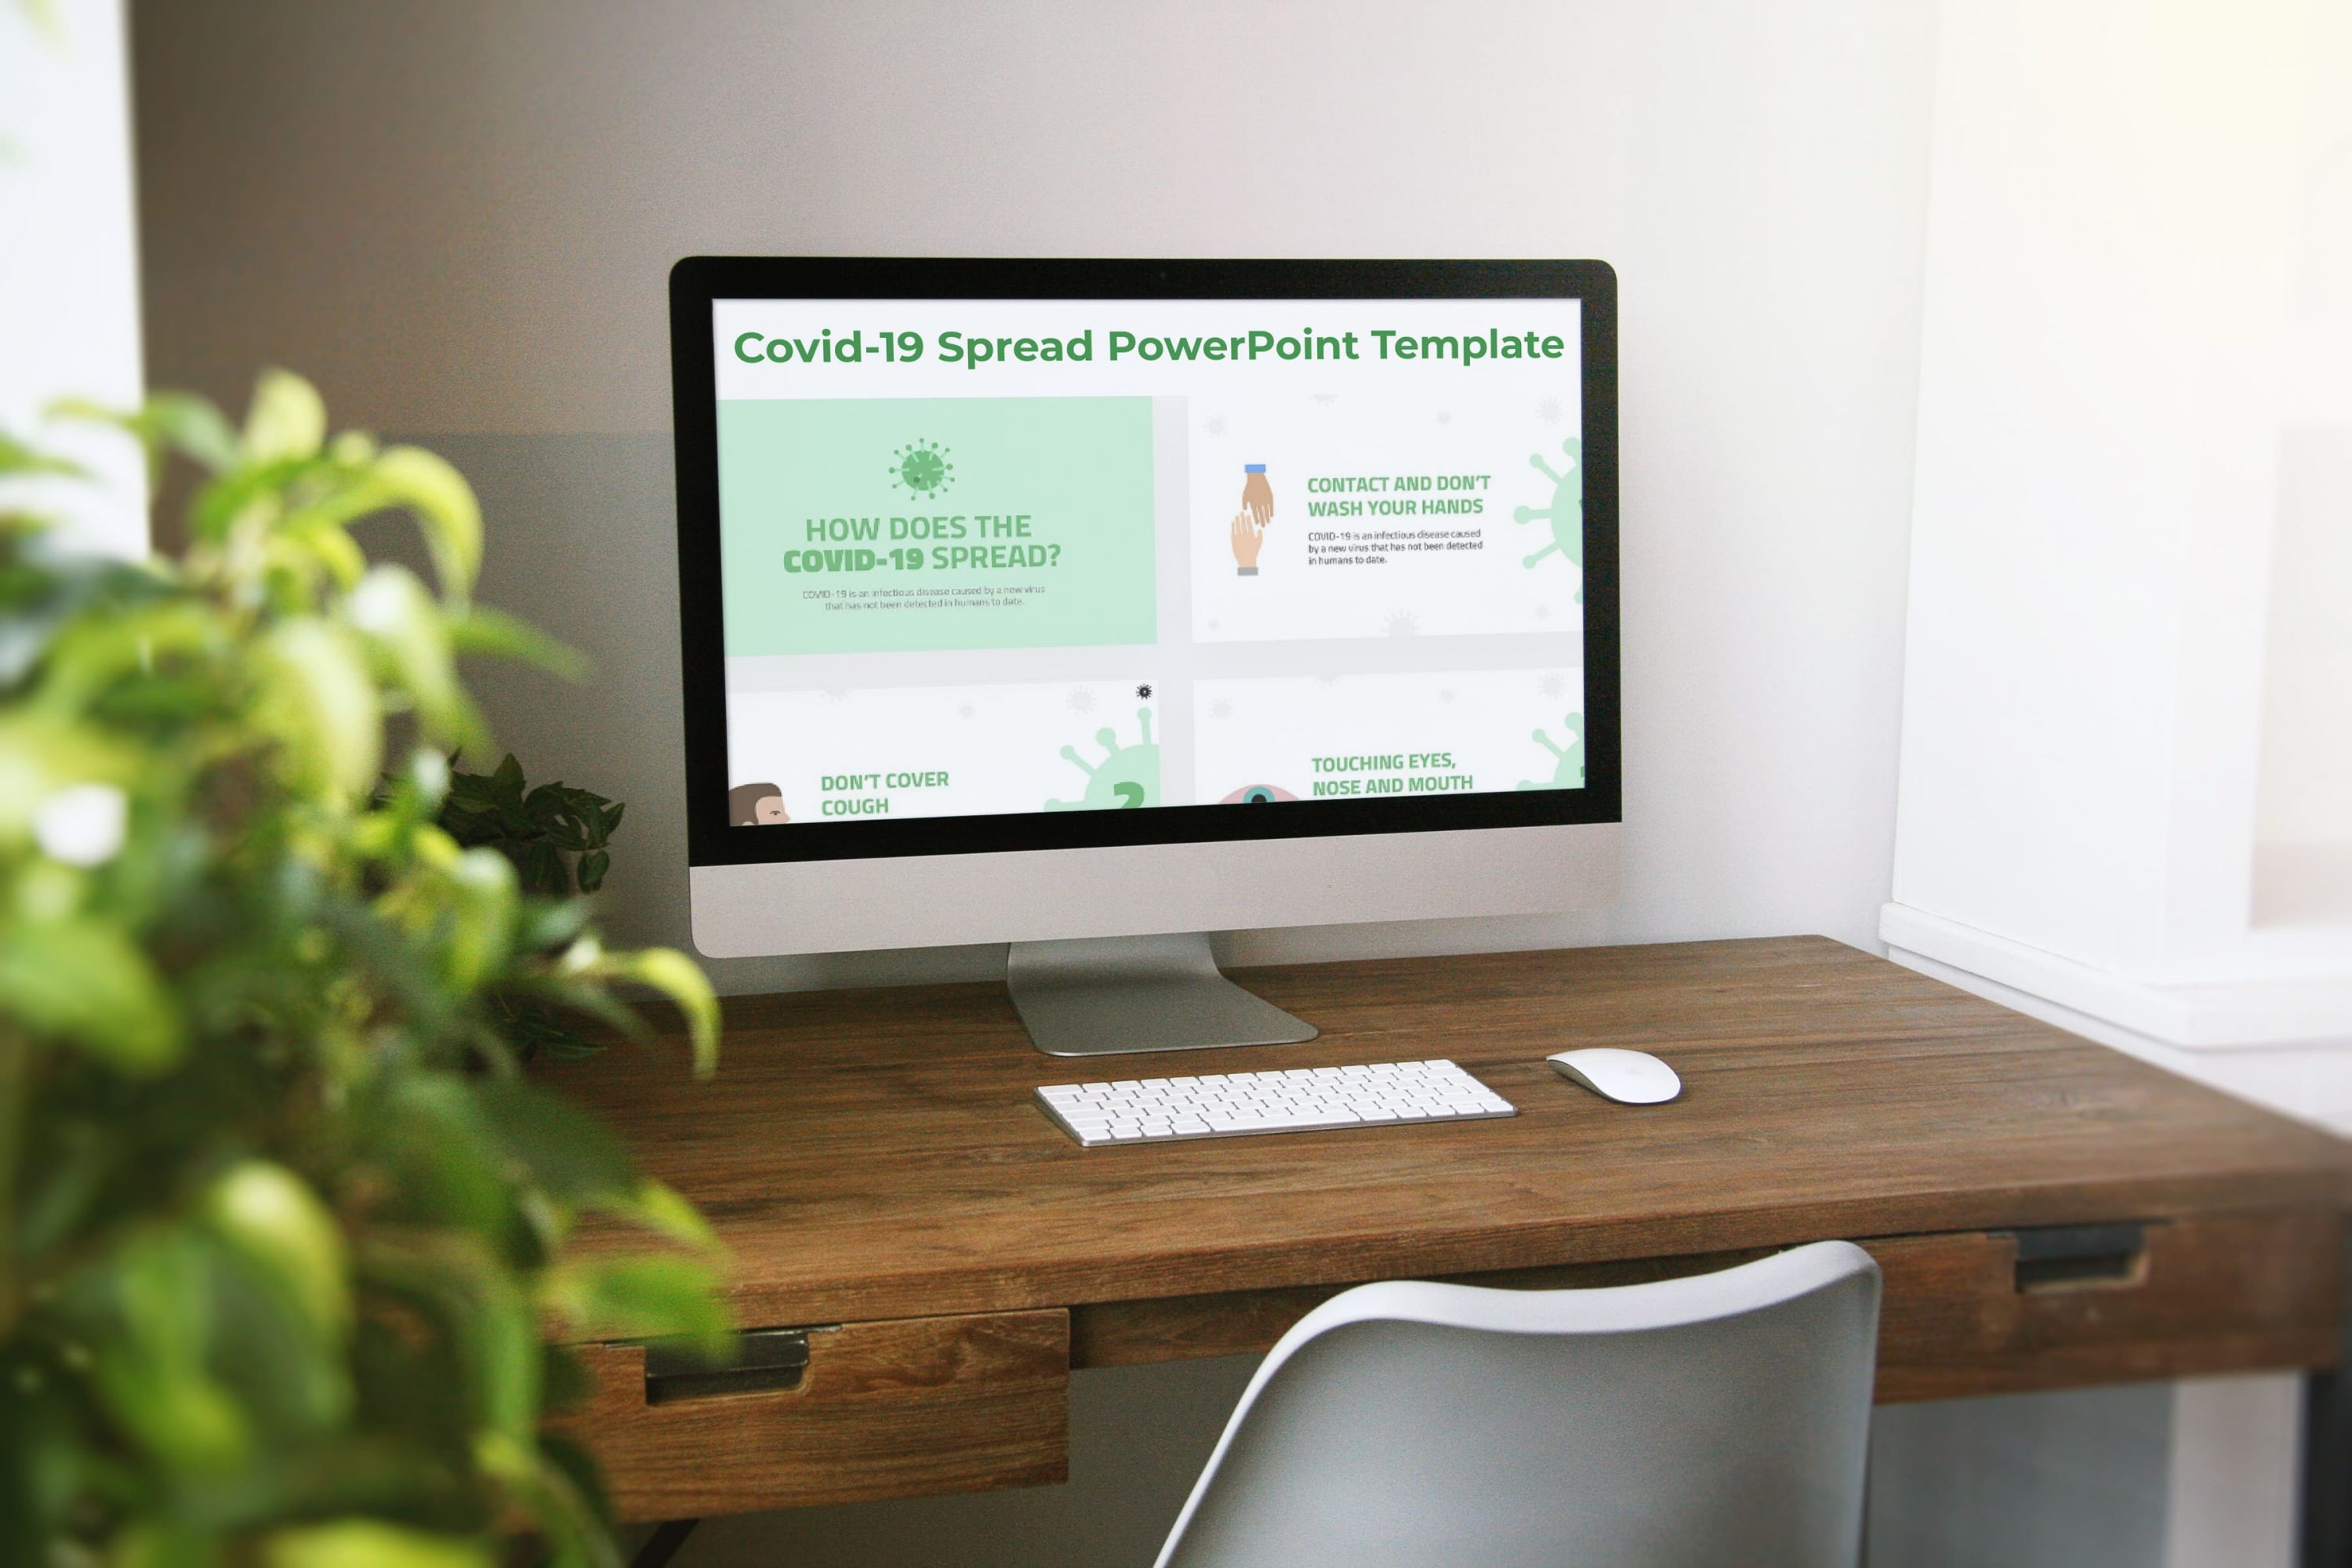 Desktop option of the Covid-19 Spread PowerPoint Template.